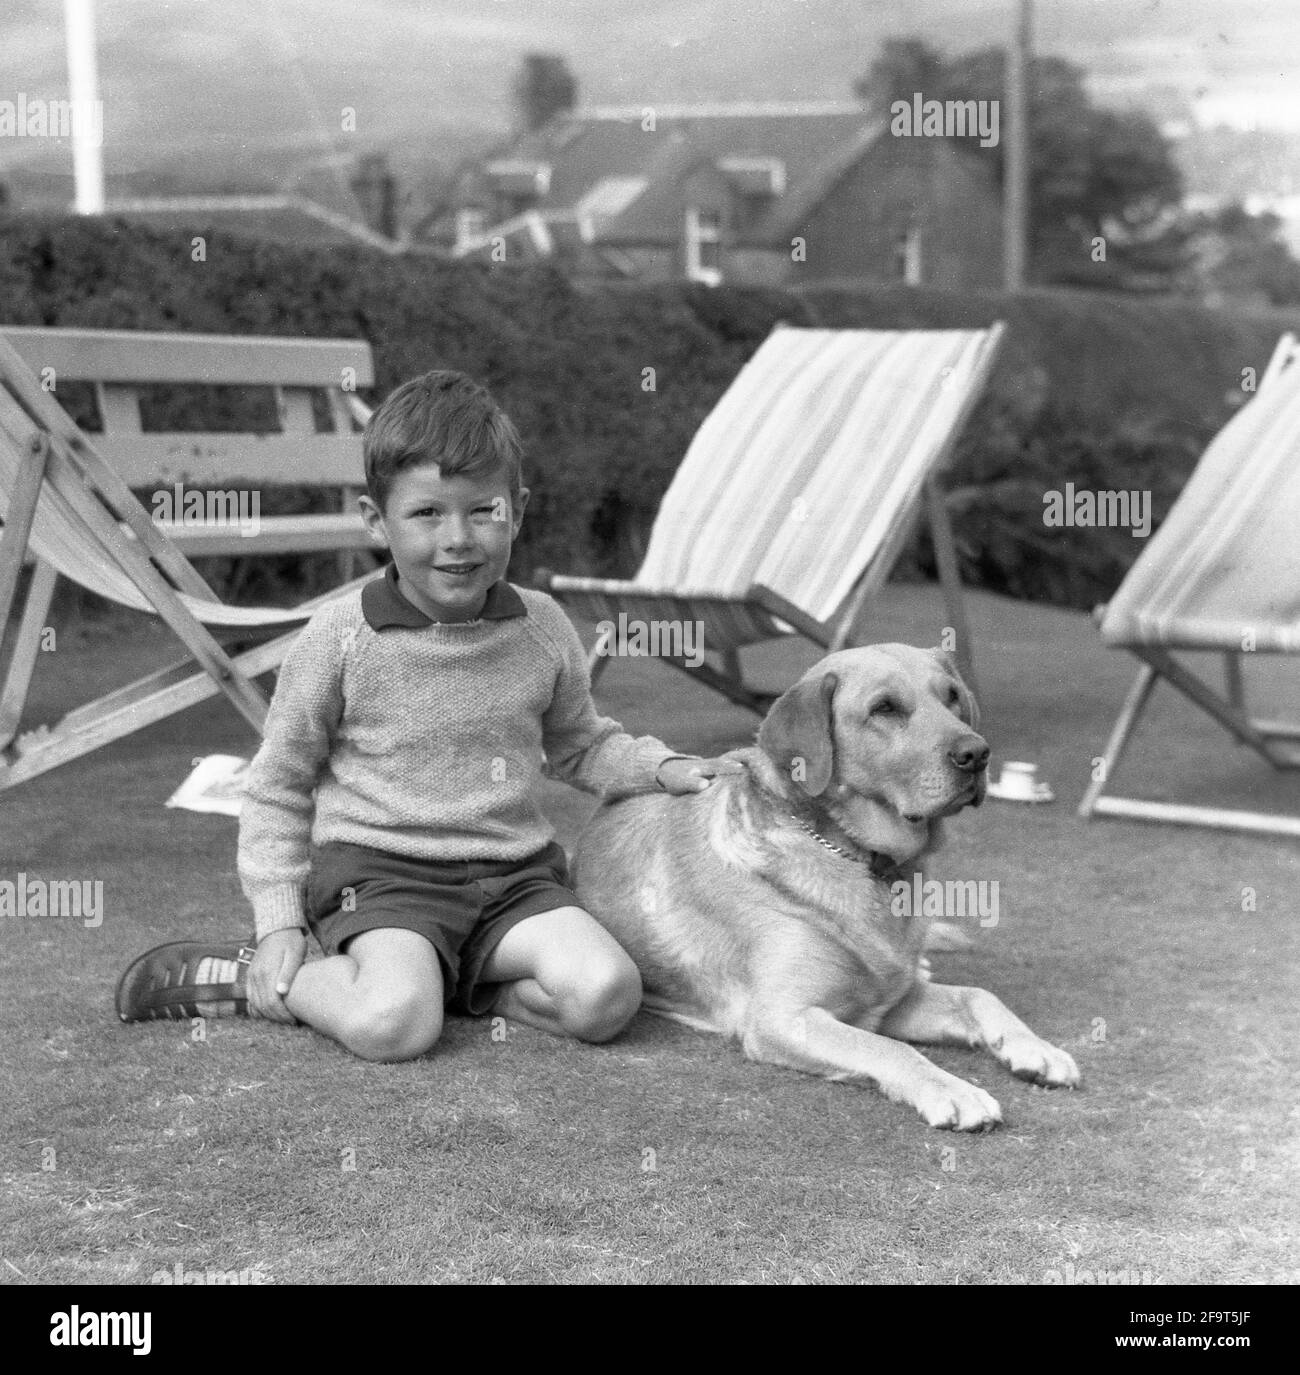 1967, historical, a young boy sitting on a lawn with a Labrador retriever dog.  Labradors are a popular pet, being a friendly companion, loyal, patient and are not aggressive, great as a family pet. There are many benefits for children in caring for a dog, including helping develop their self-esteem, learning responsibility and empathy. There are also the health aspects of walking a dog outside and they to build up a stronger immune system. Stock Photo